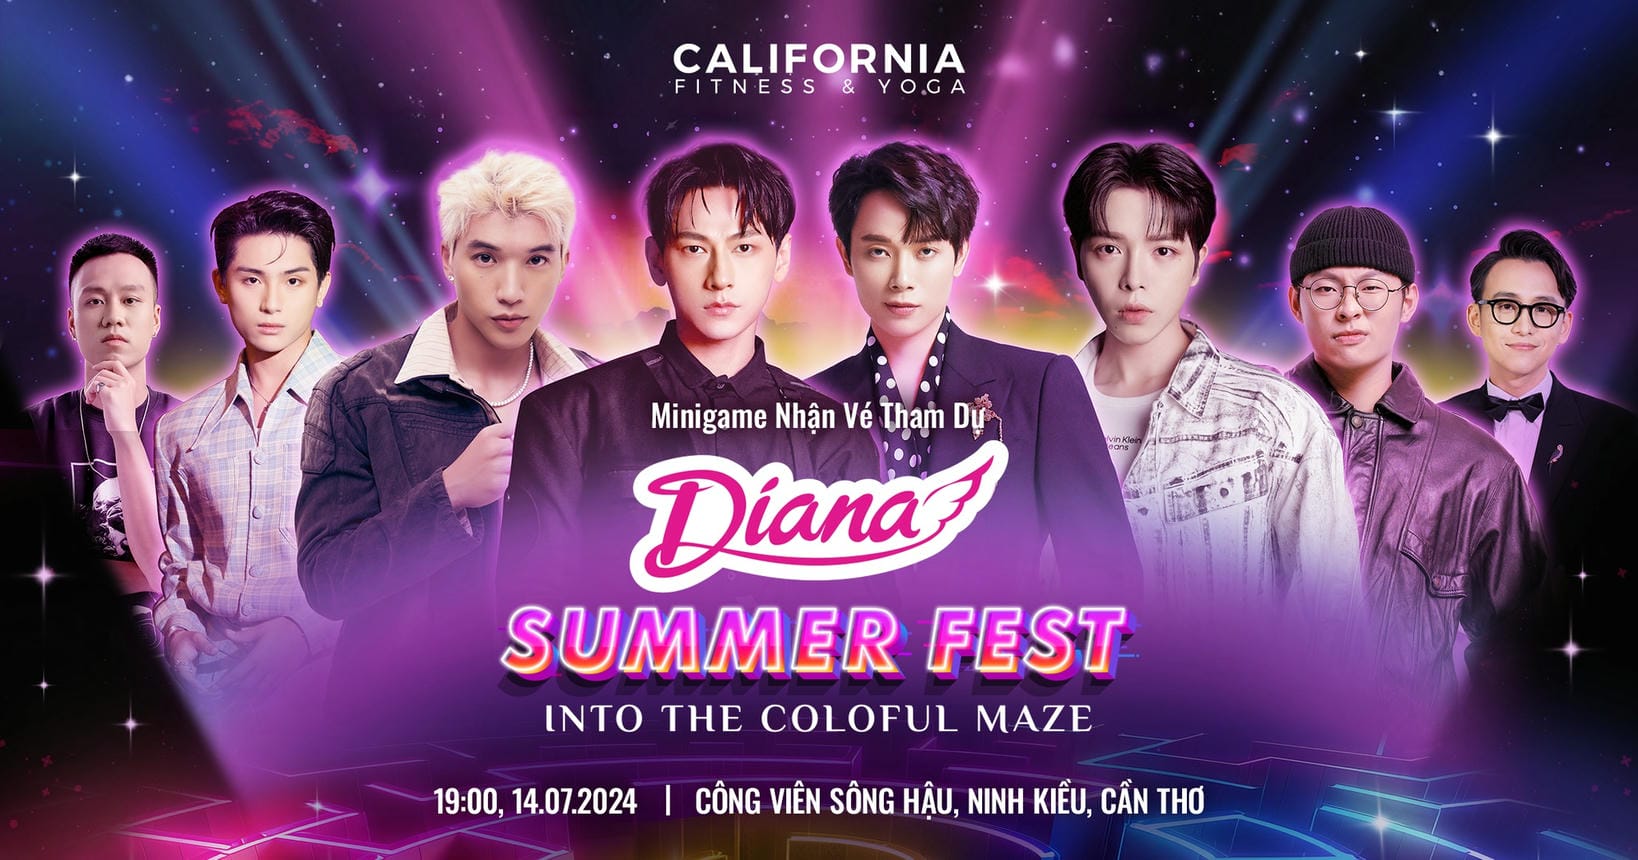 California x Diana: GET YOUR DIANA SUMMER FEST TICKETS NOW